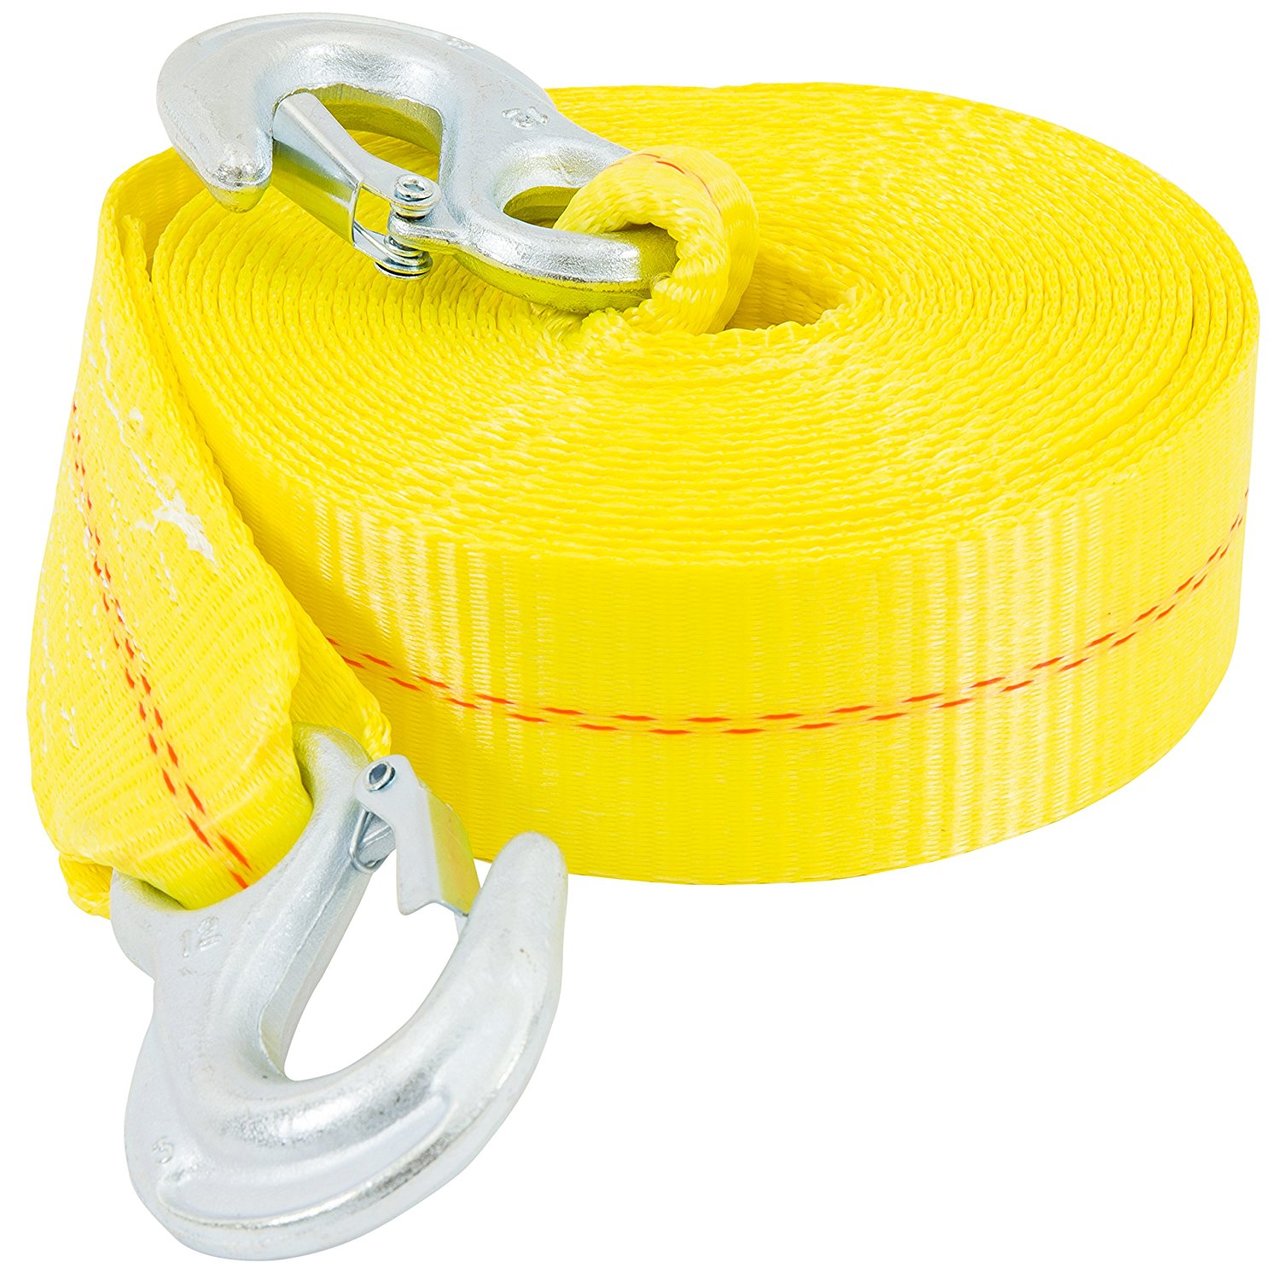 Keeper 02815 15 ft Tow Strap